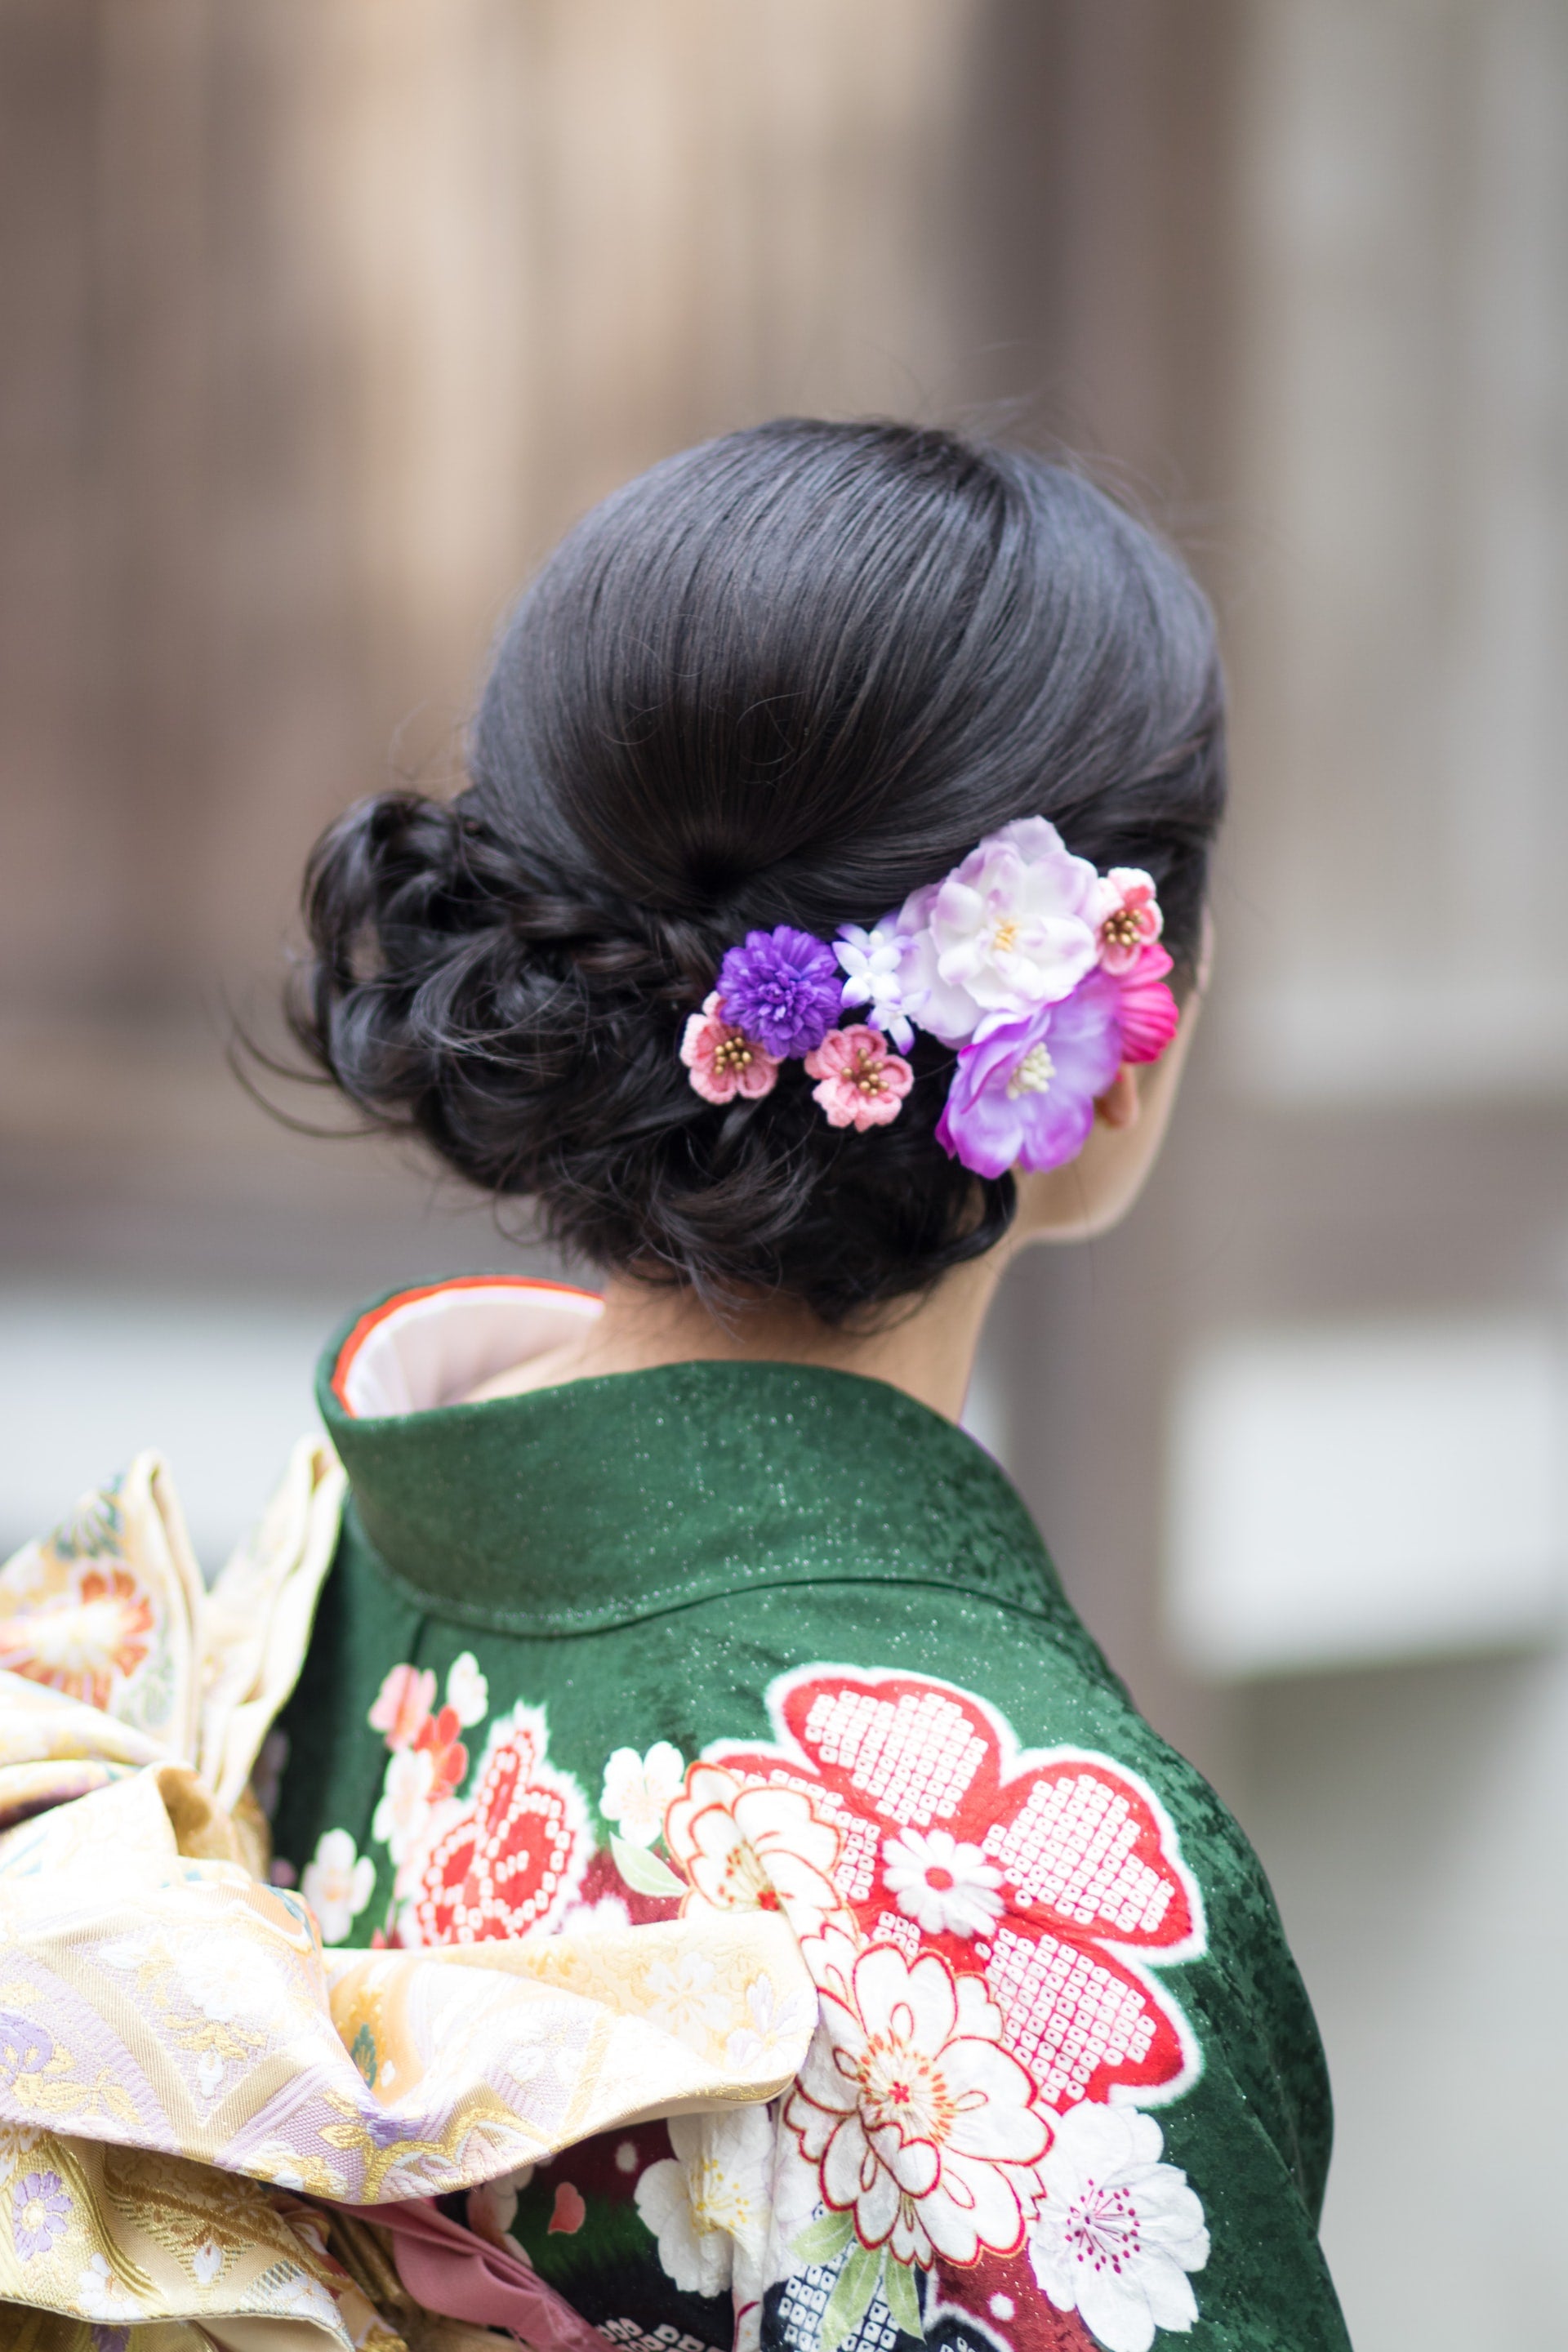 Hair Accessories Trends for Women in 2023